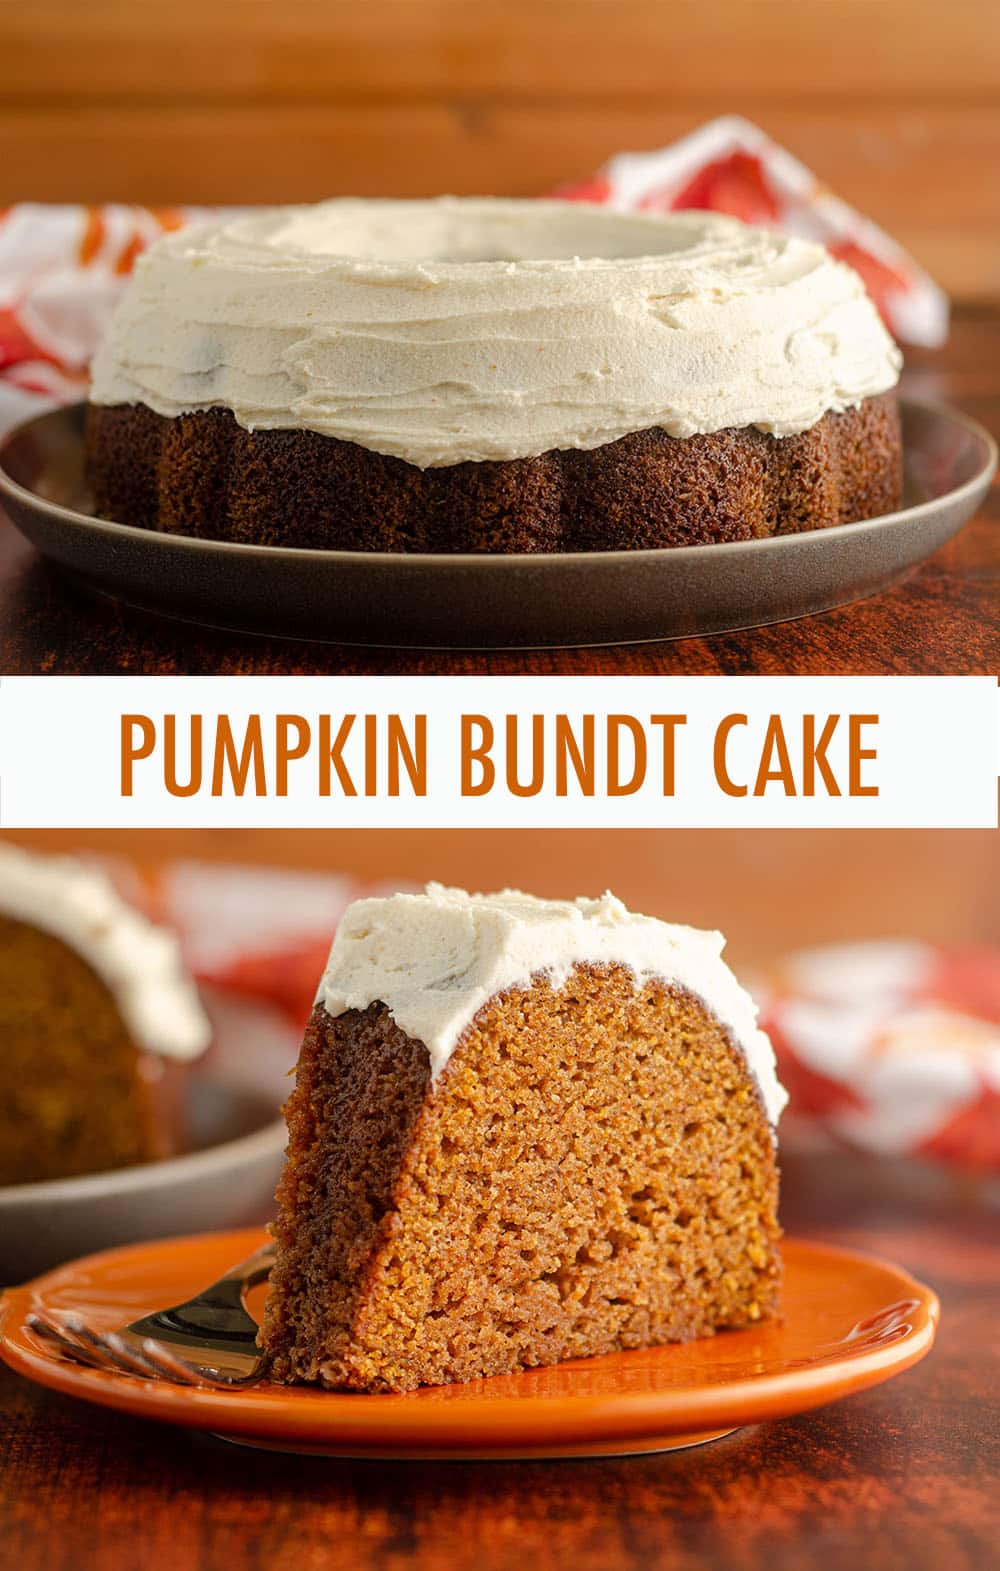 Moist, spiced bundt cake made with real pumpkin and covered in a decadent brown butter buttercream. via @frshaprilflours